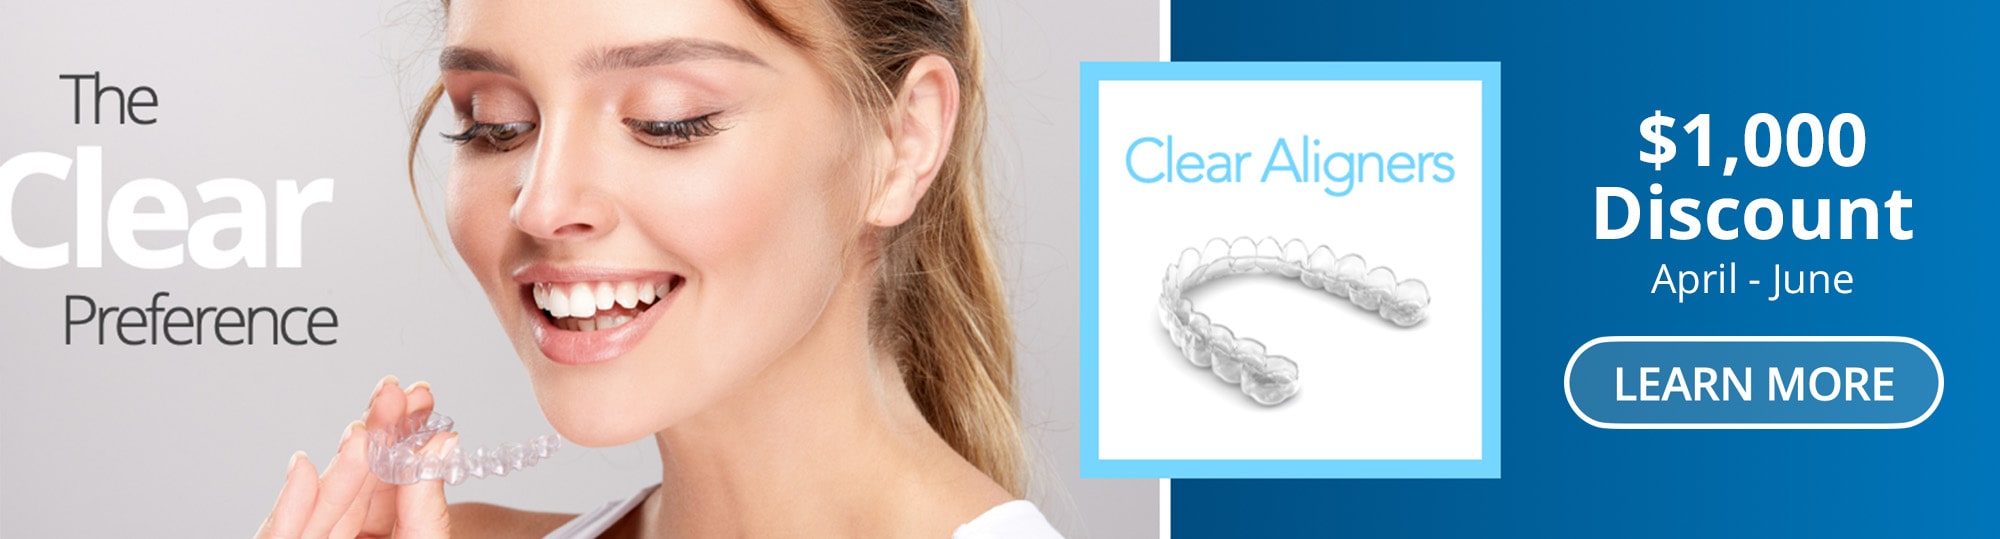 clear aligners $1000 off call today